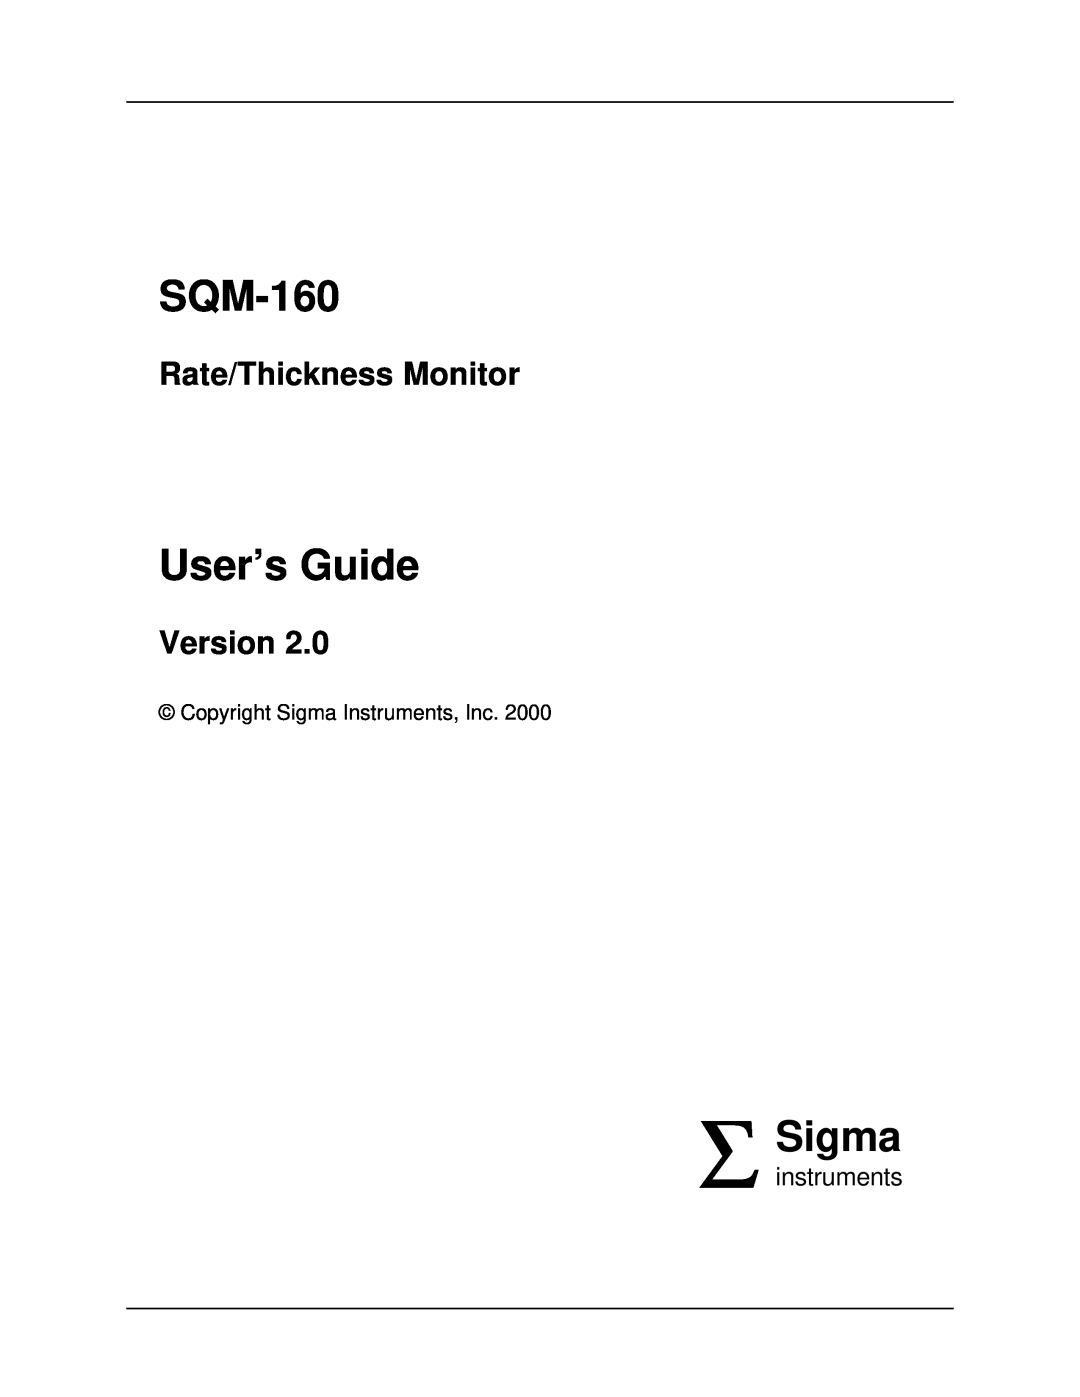 Sigma SQM-160 manual User’s Guide, Rate/Thickness Monitor, Version, Σ Sigmainstruments 